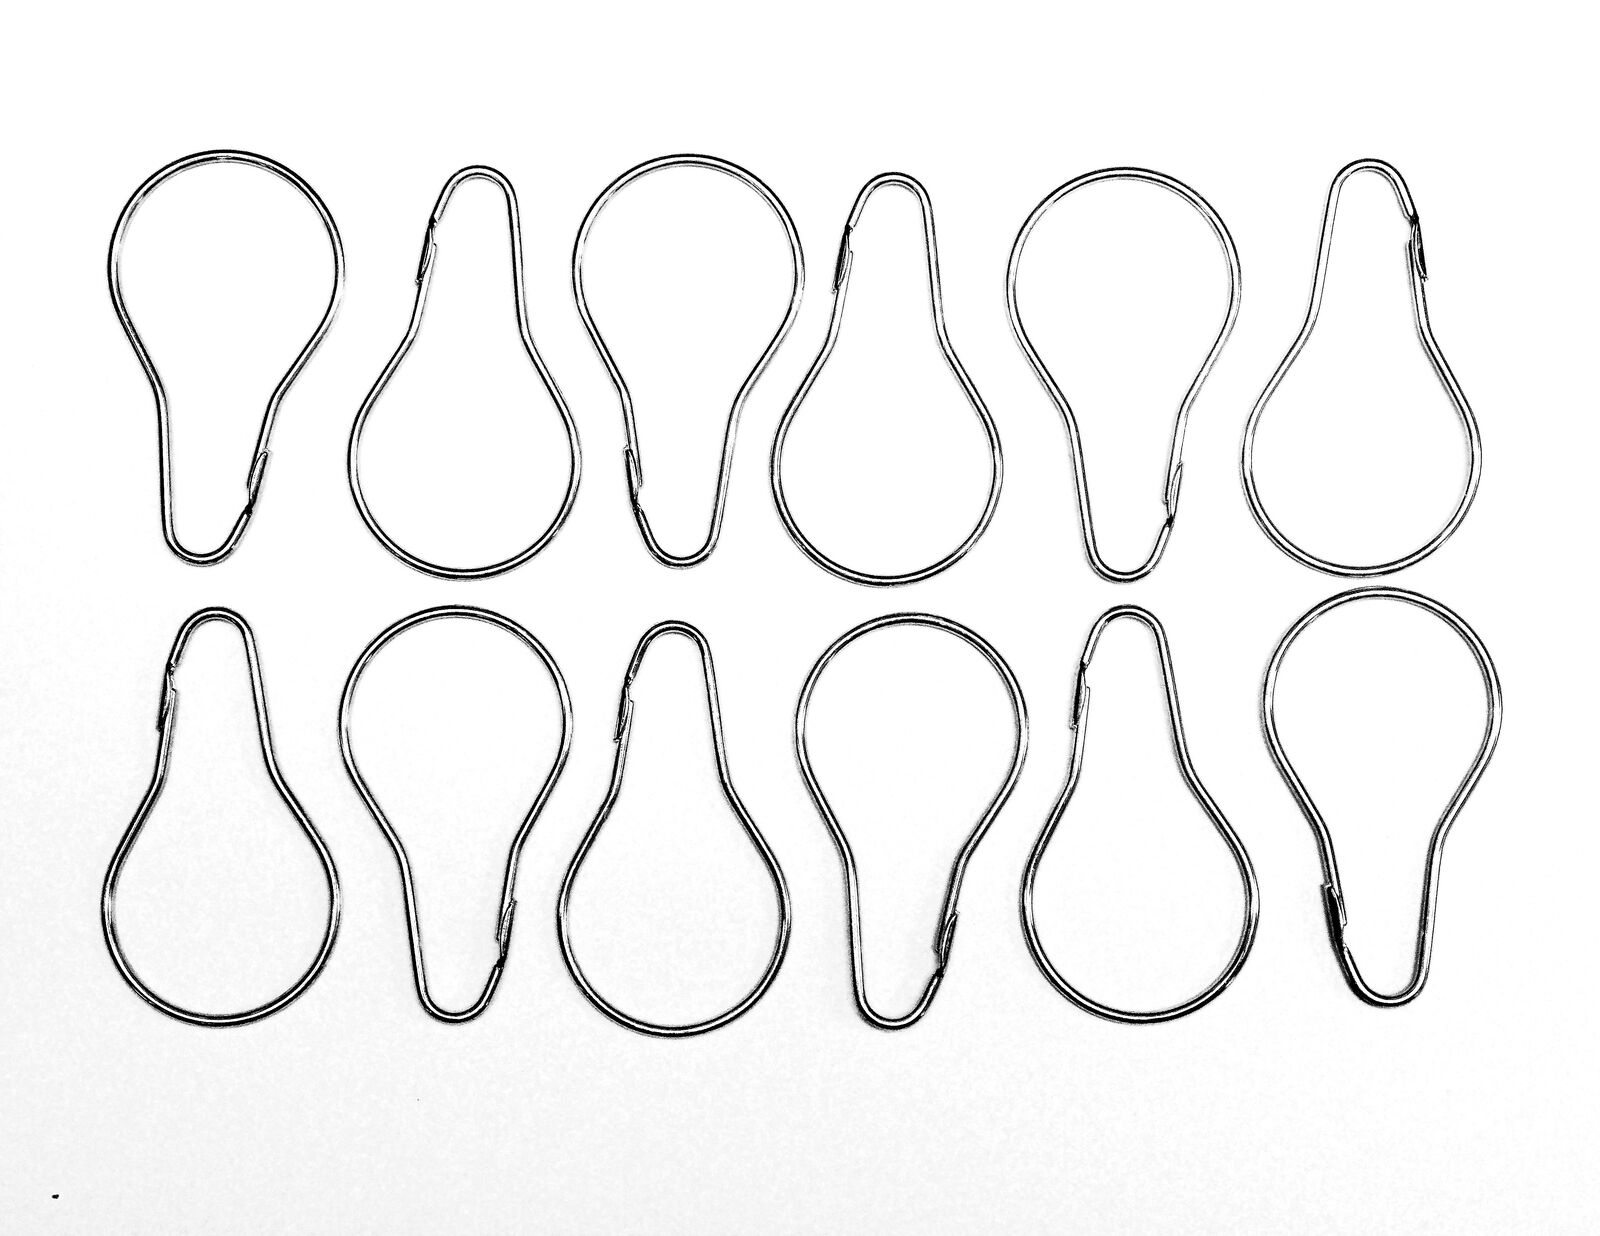 QUALITY Zinc SHOWER CURTAIN RINGS - 2.4mm Thick New arrival Hooks 12-Pack Special price for a limited time